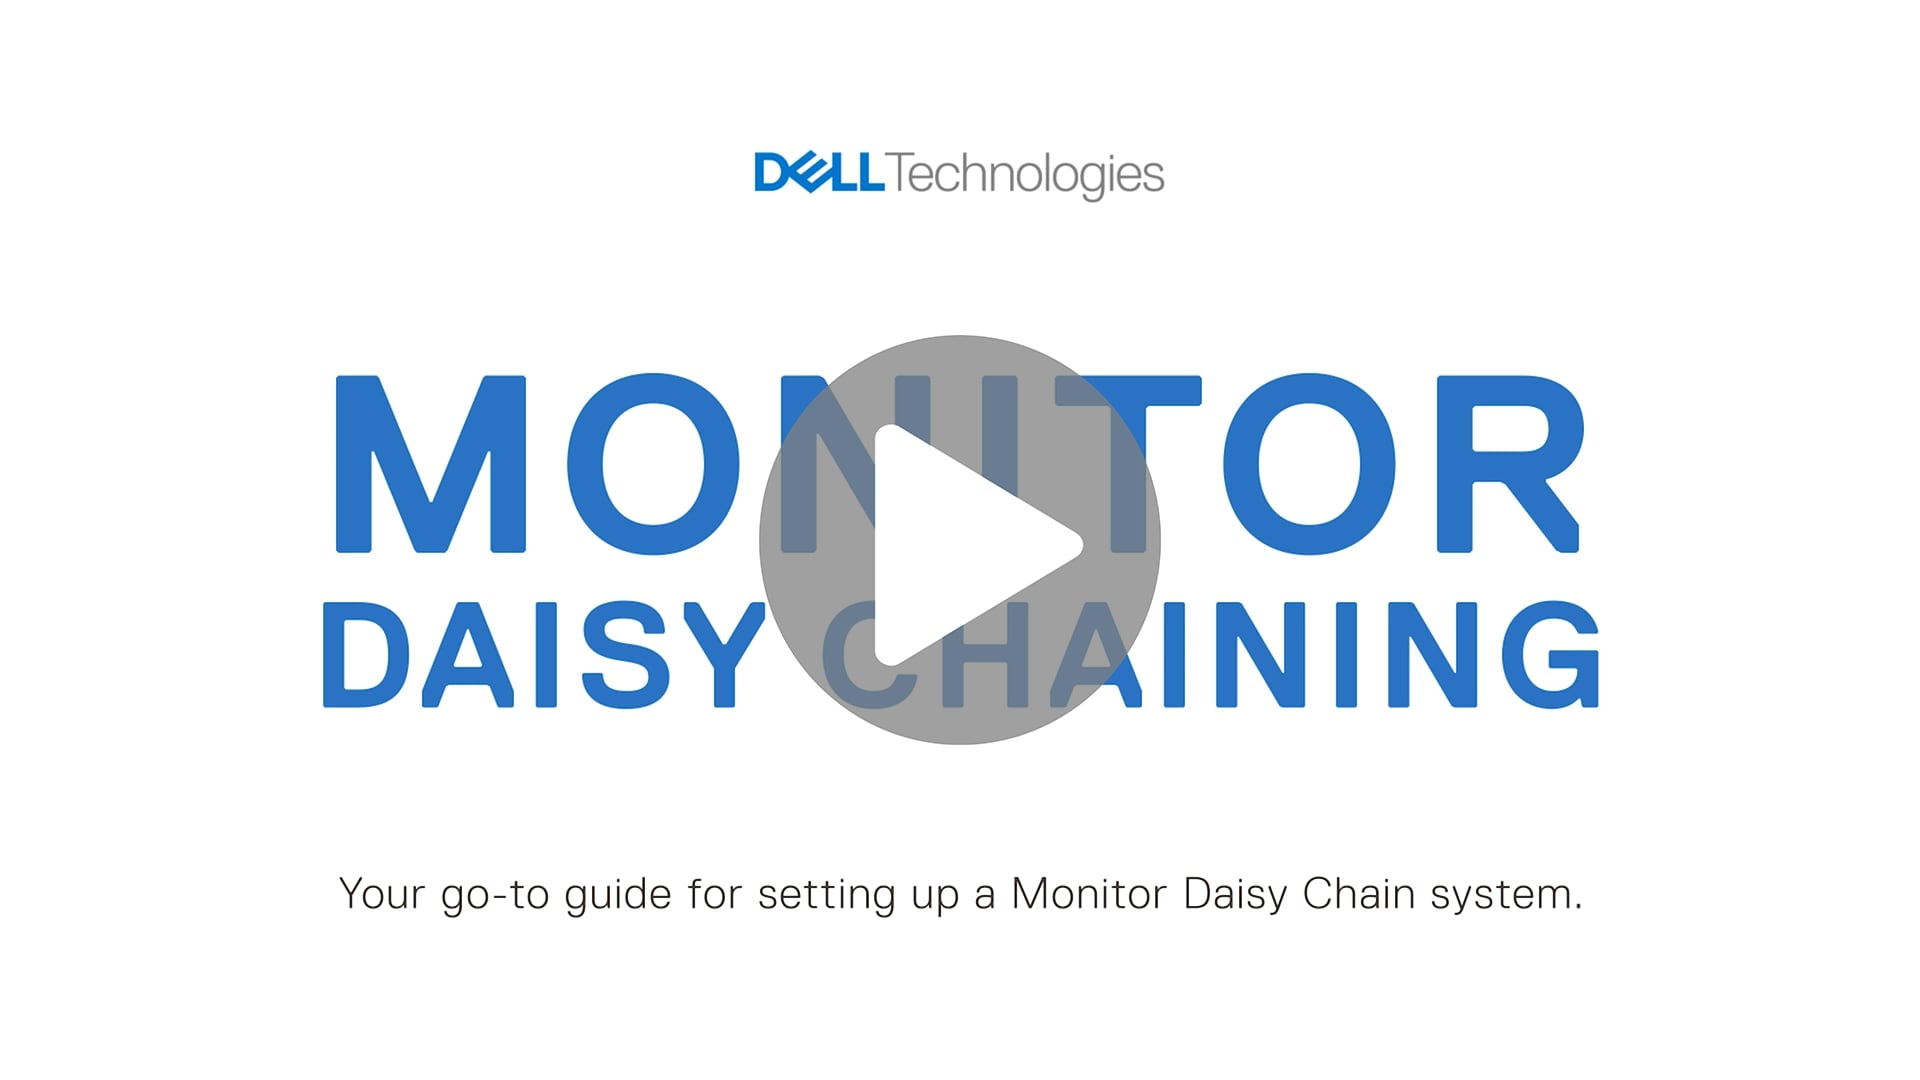 Watch this video to learn about monitor daisy chaining